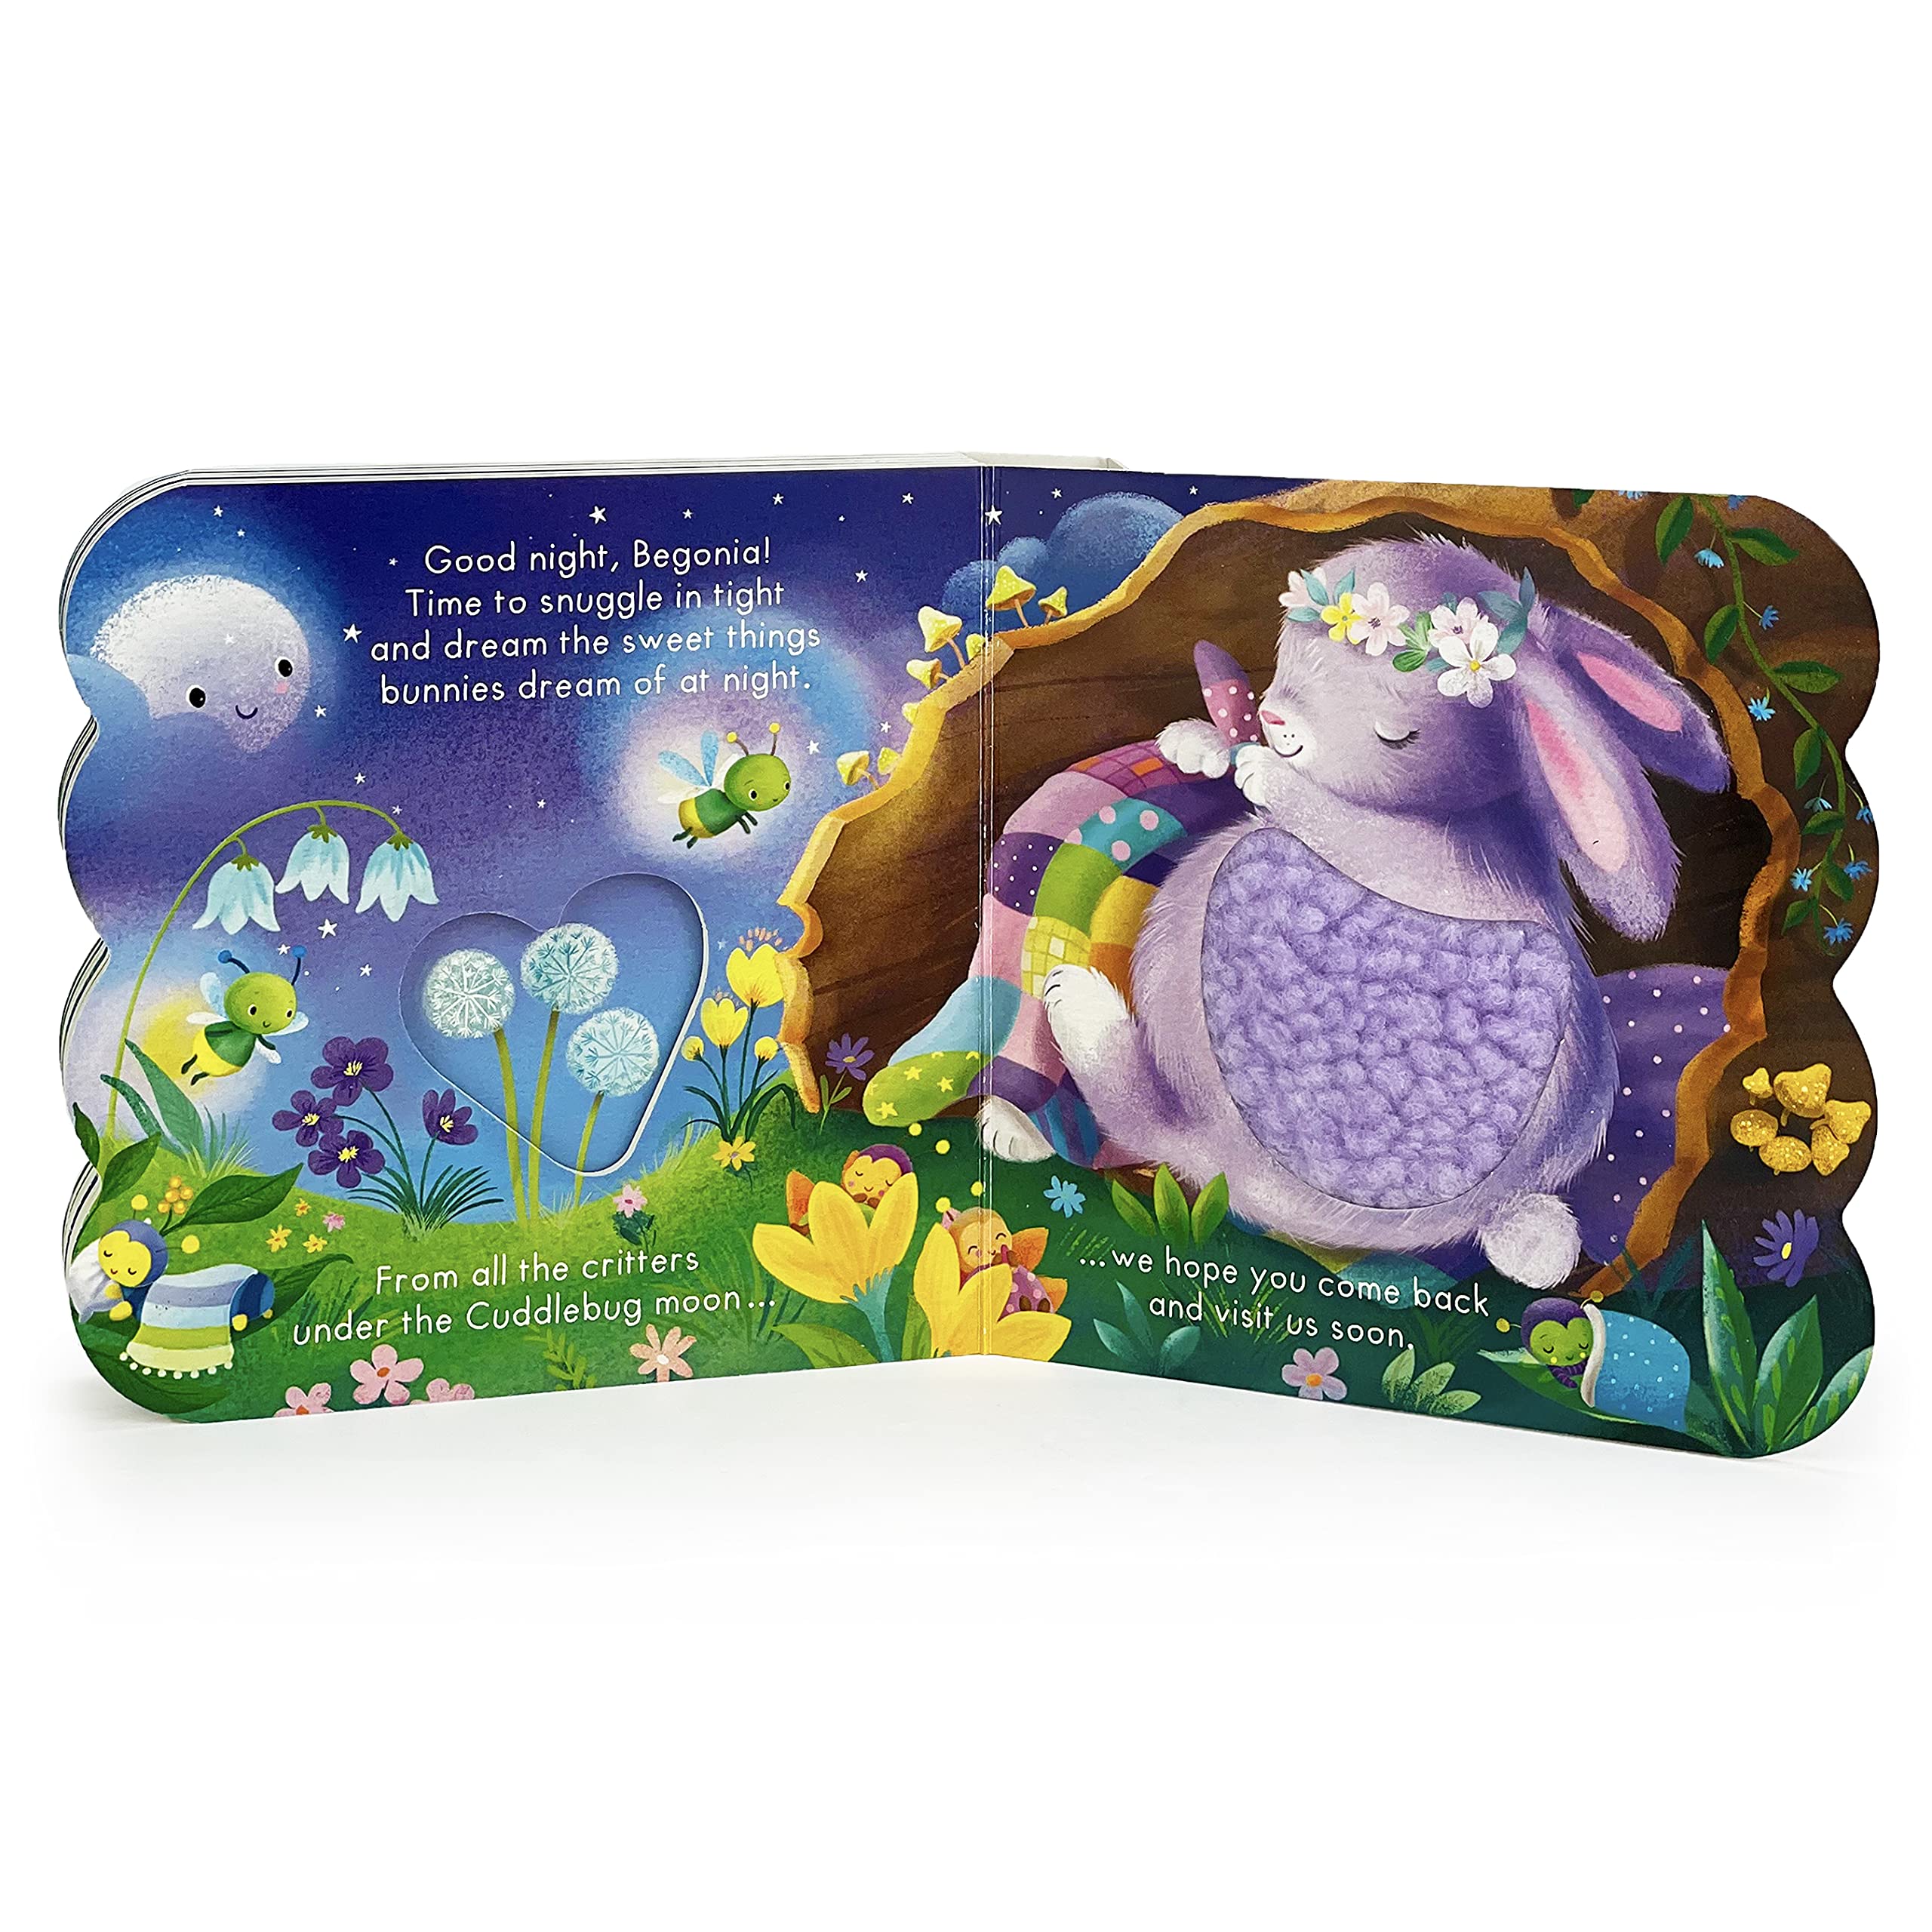 Touch & Feel: Good Night, Cuddlebug Lane: Baby & Toddler Touch and Feel Sensory Board Book